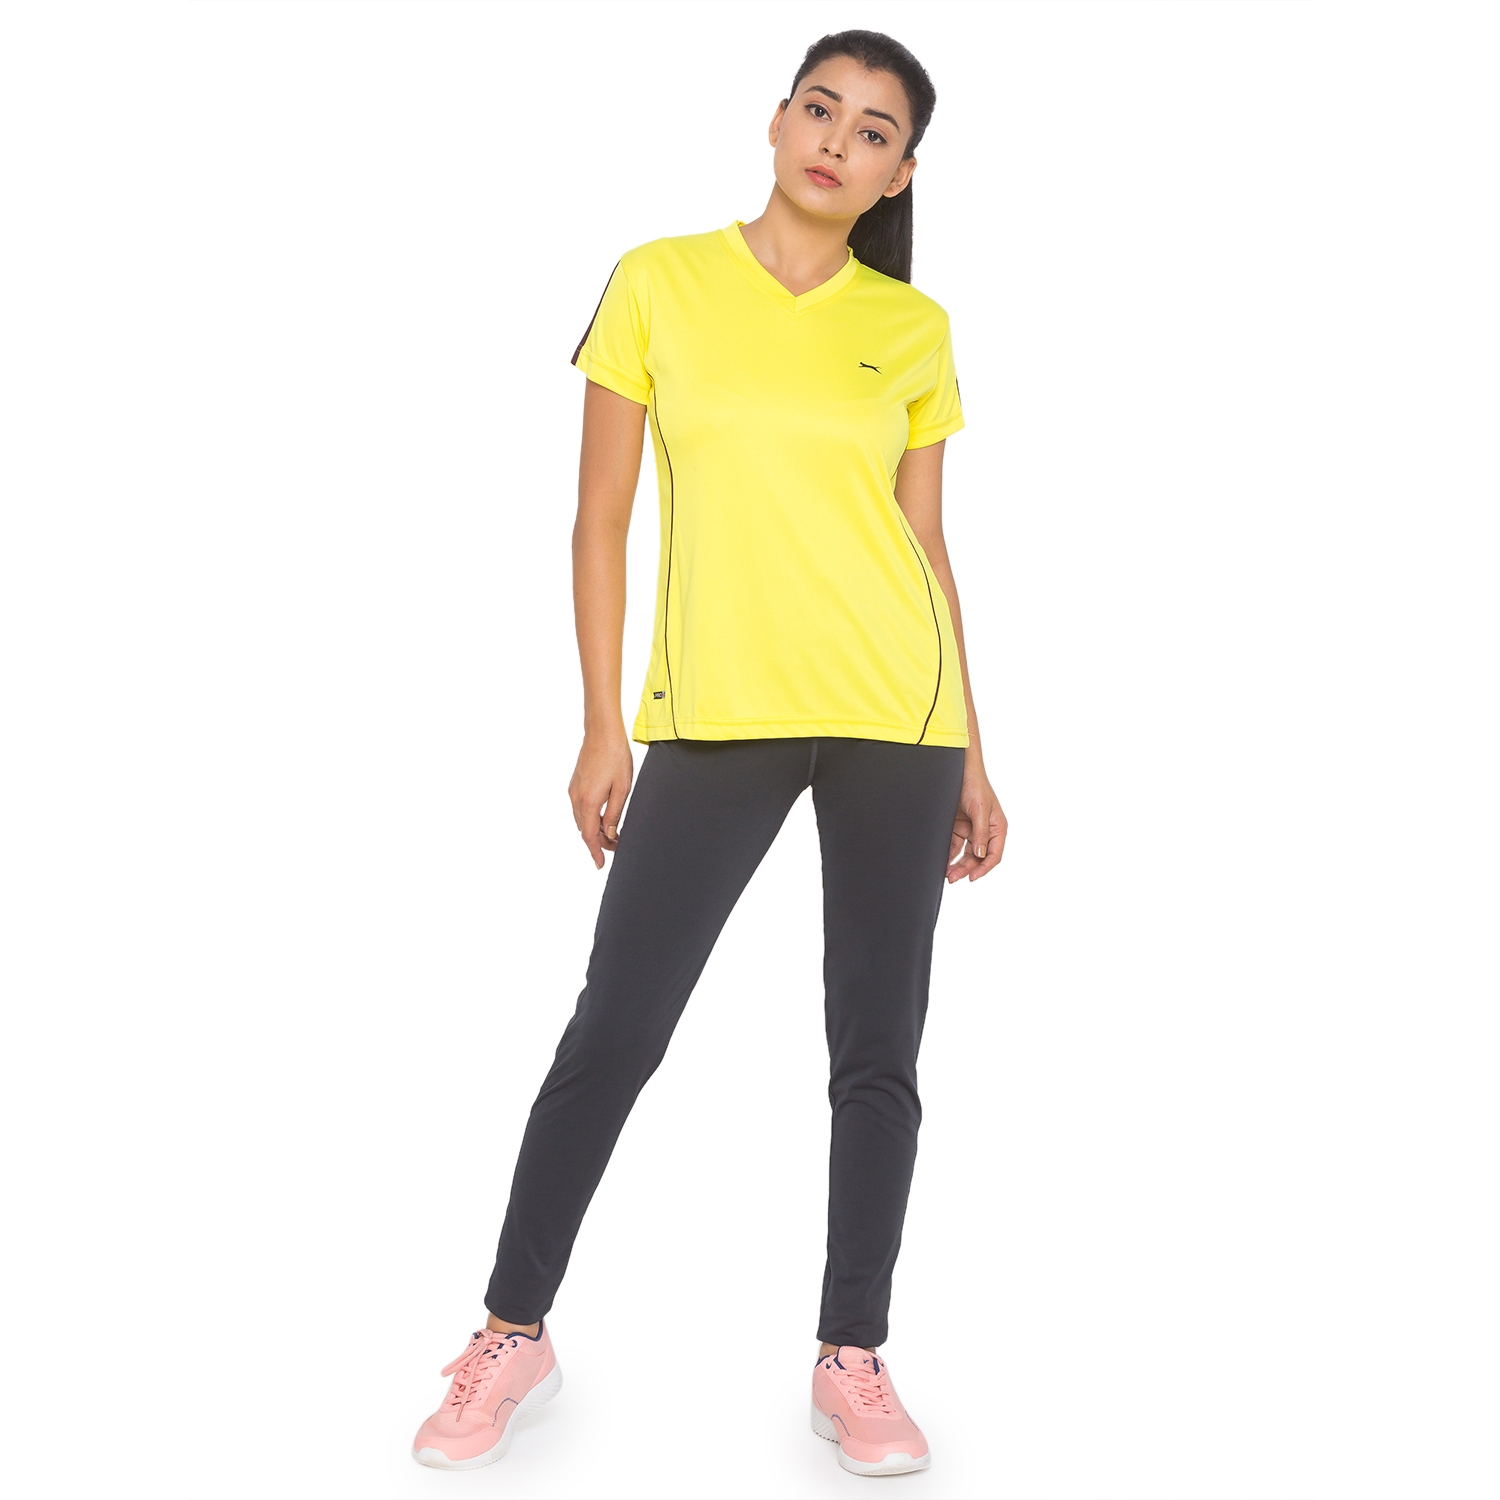 BLACK PANTHER | Black Panther Womens F.Yellow Acti Fit Tshirts 4